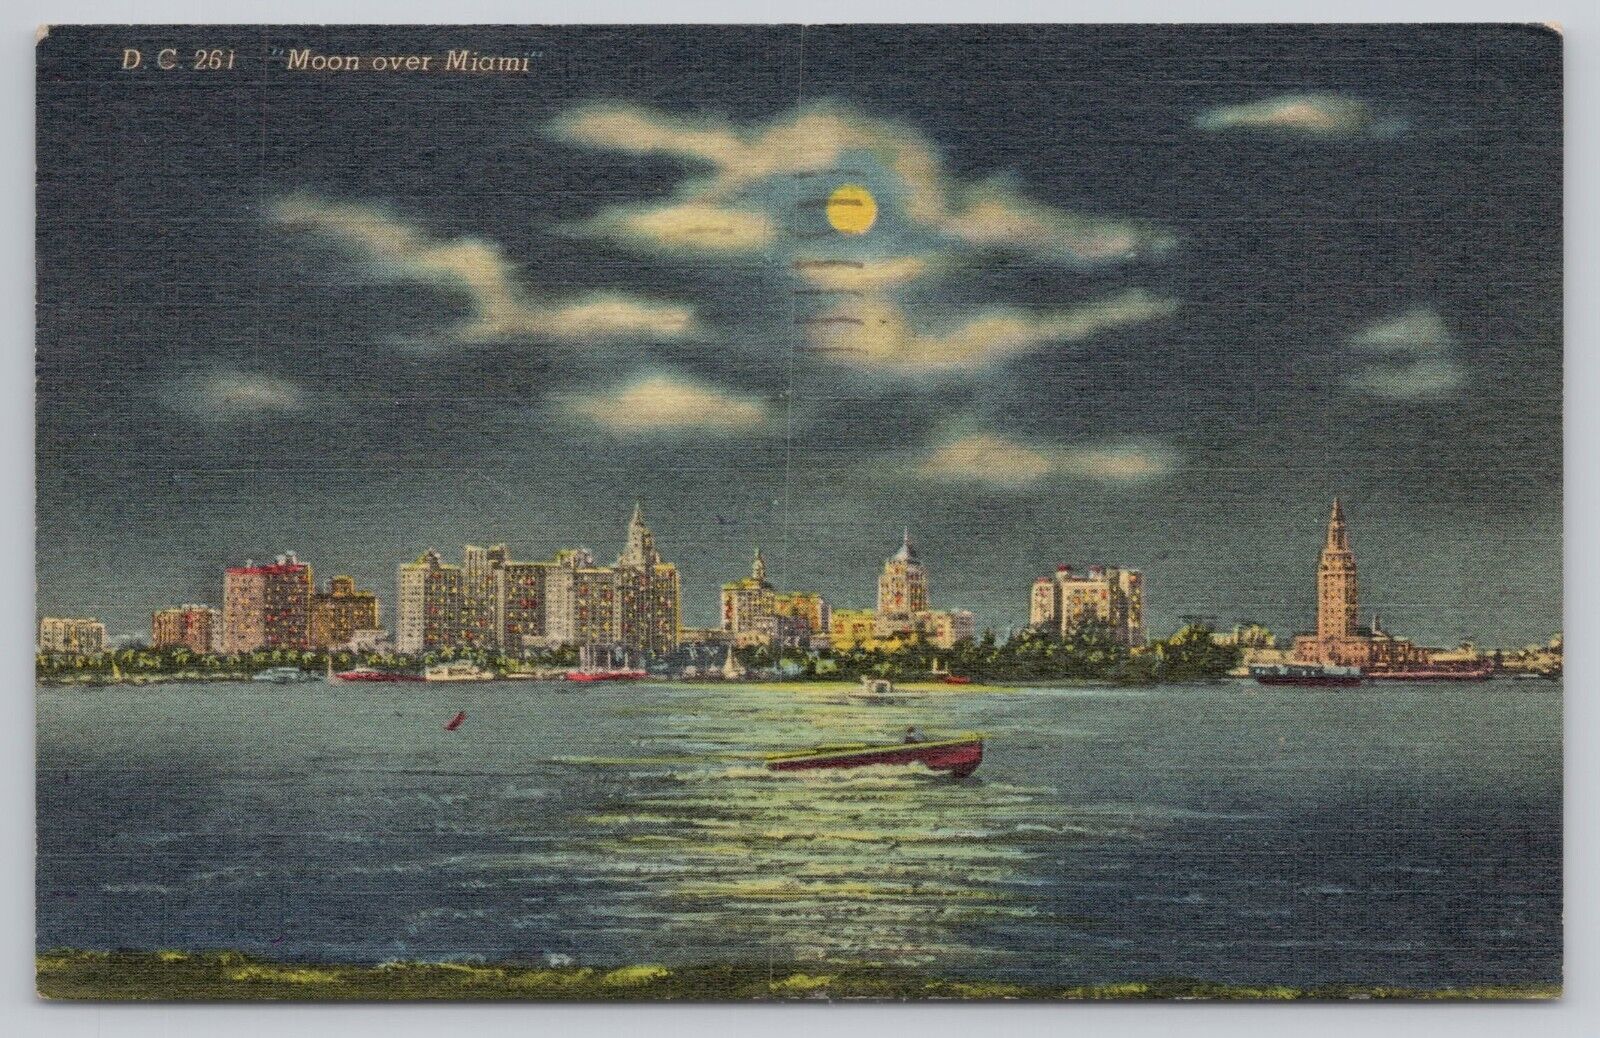 Postcard Moon Over Miami. City View with Boats. Vintage PM 1955